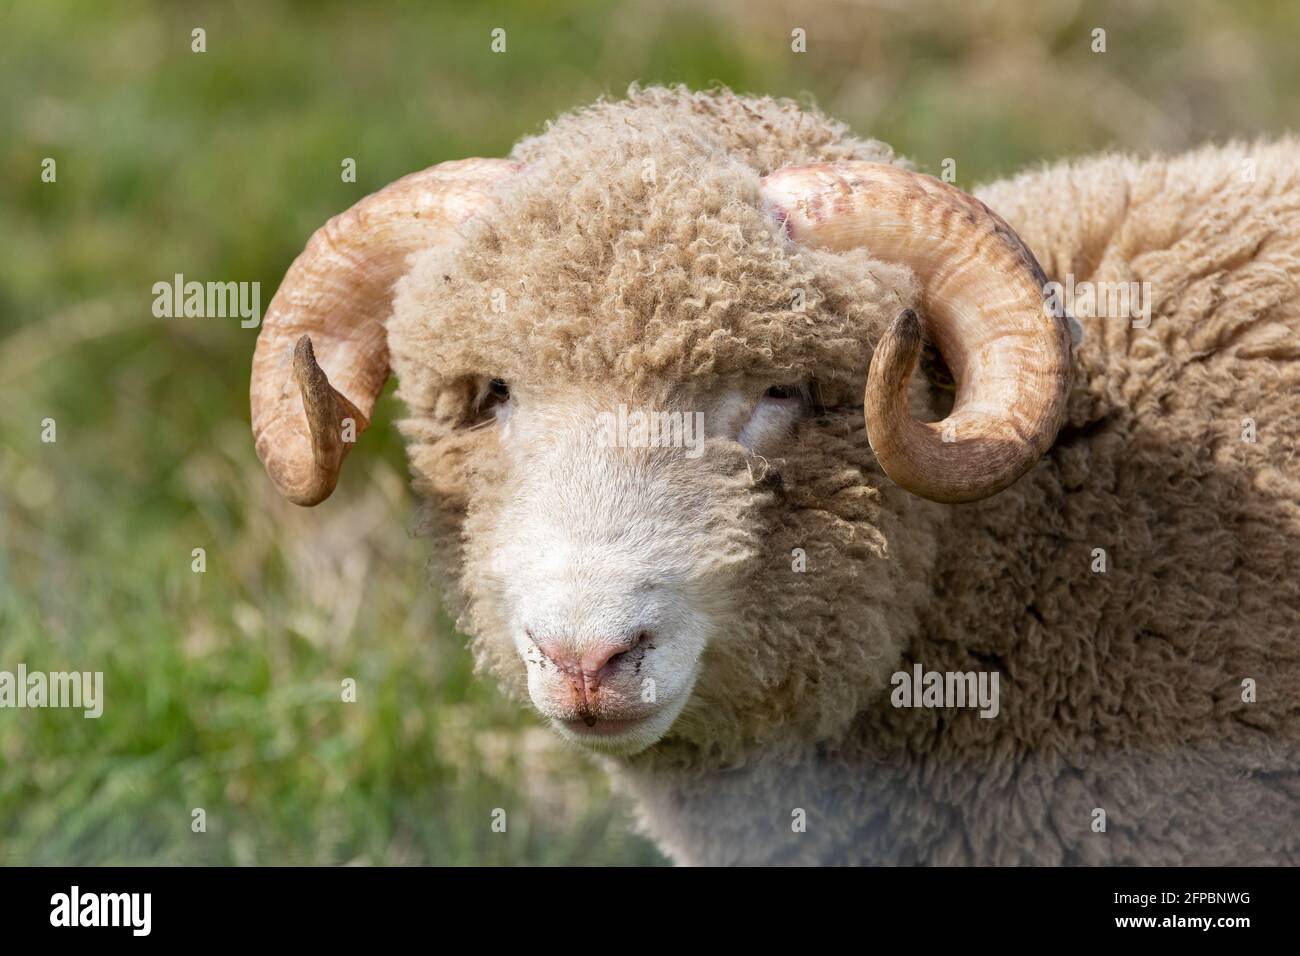 A portrait of a horned sheep in the UK countryside Stock Photo